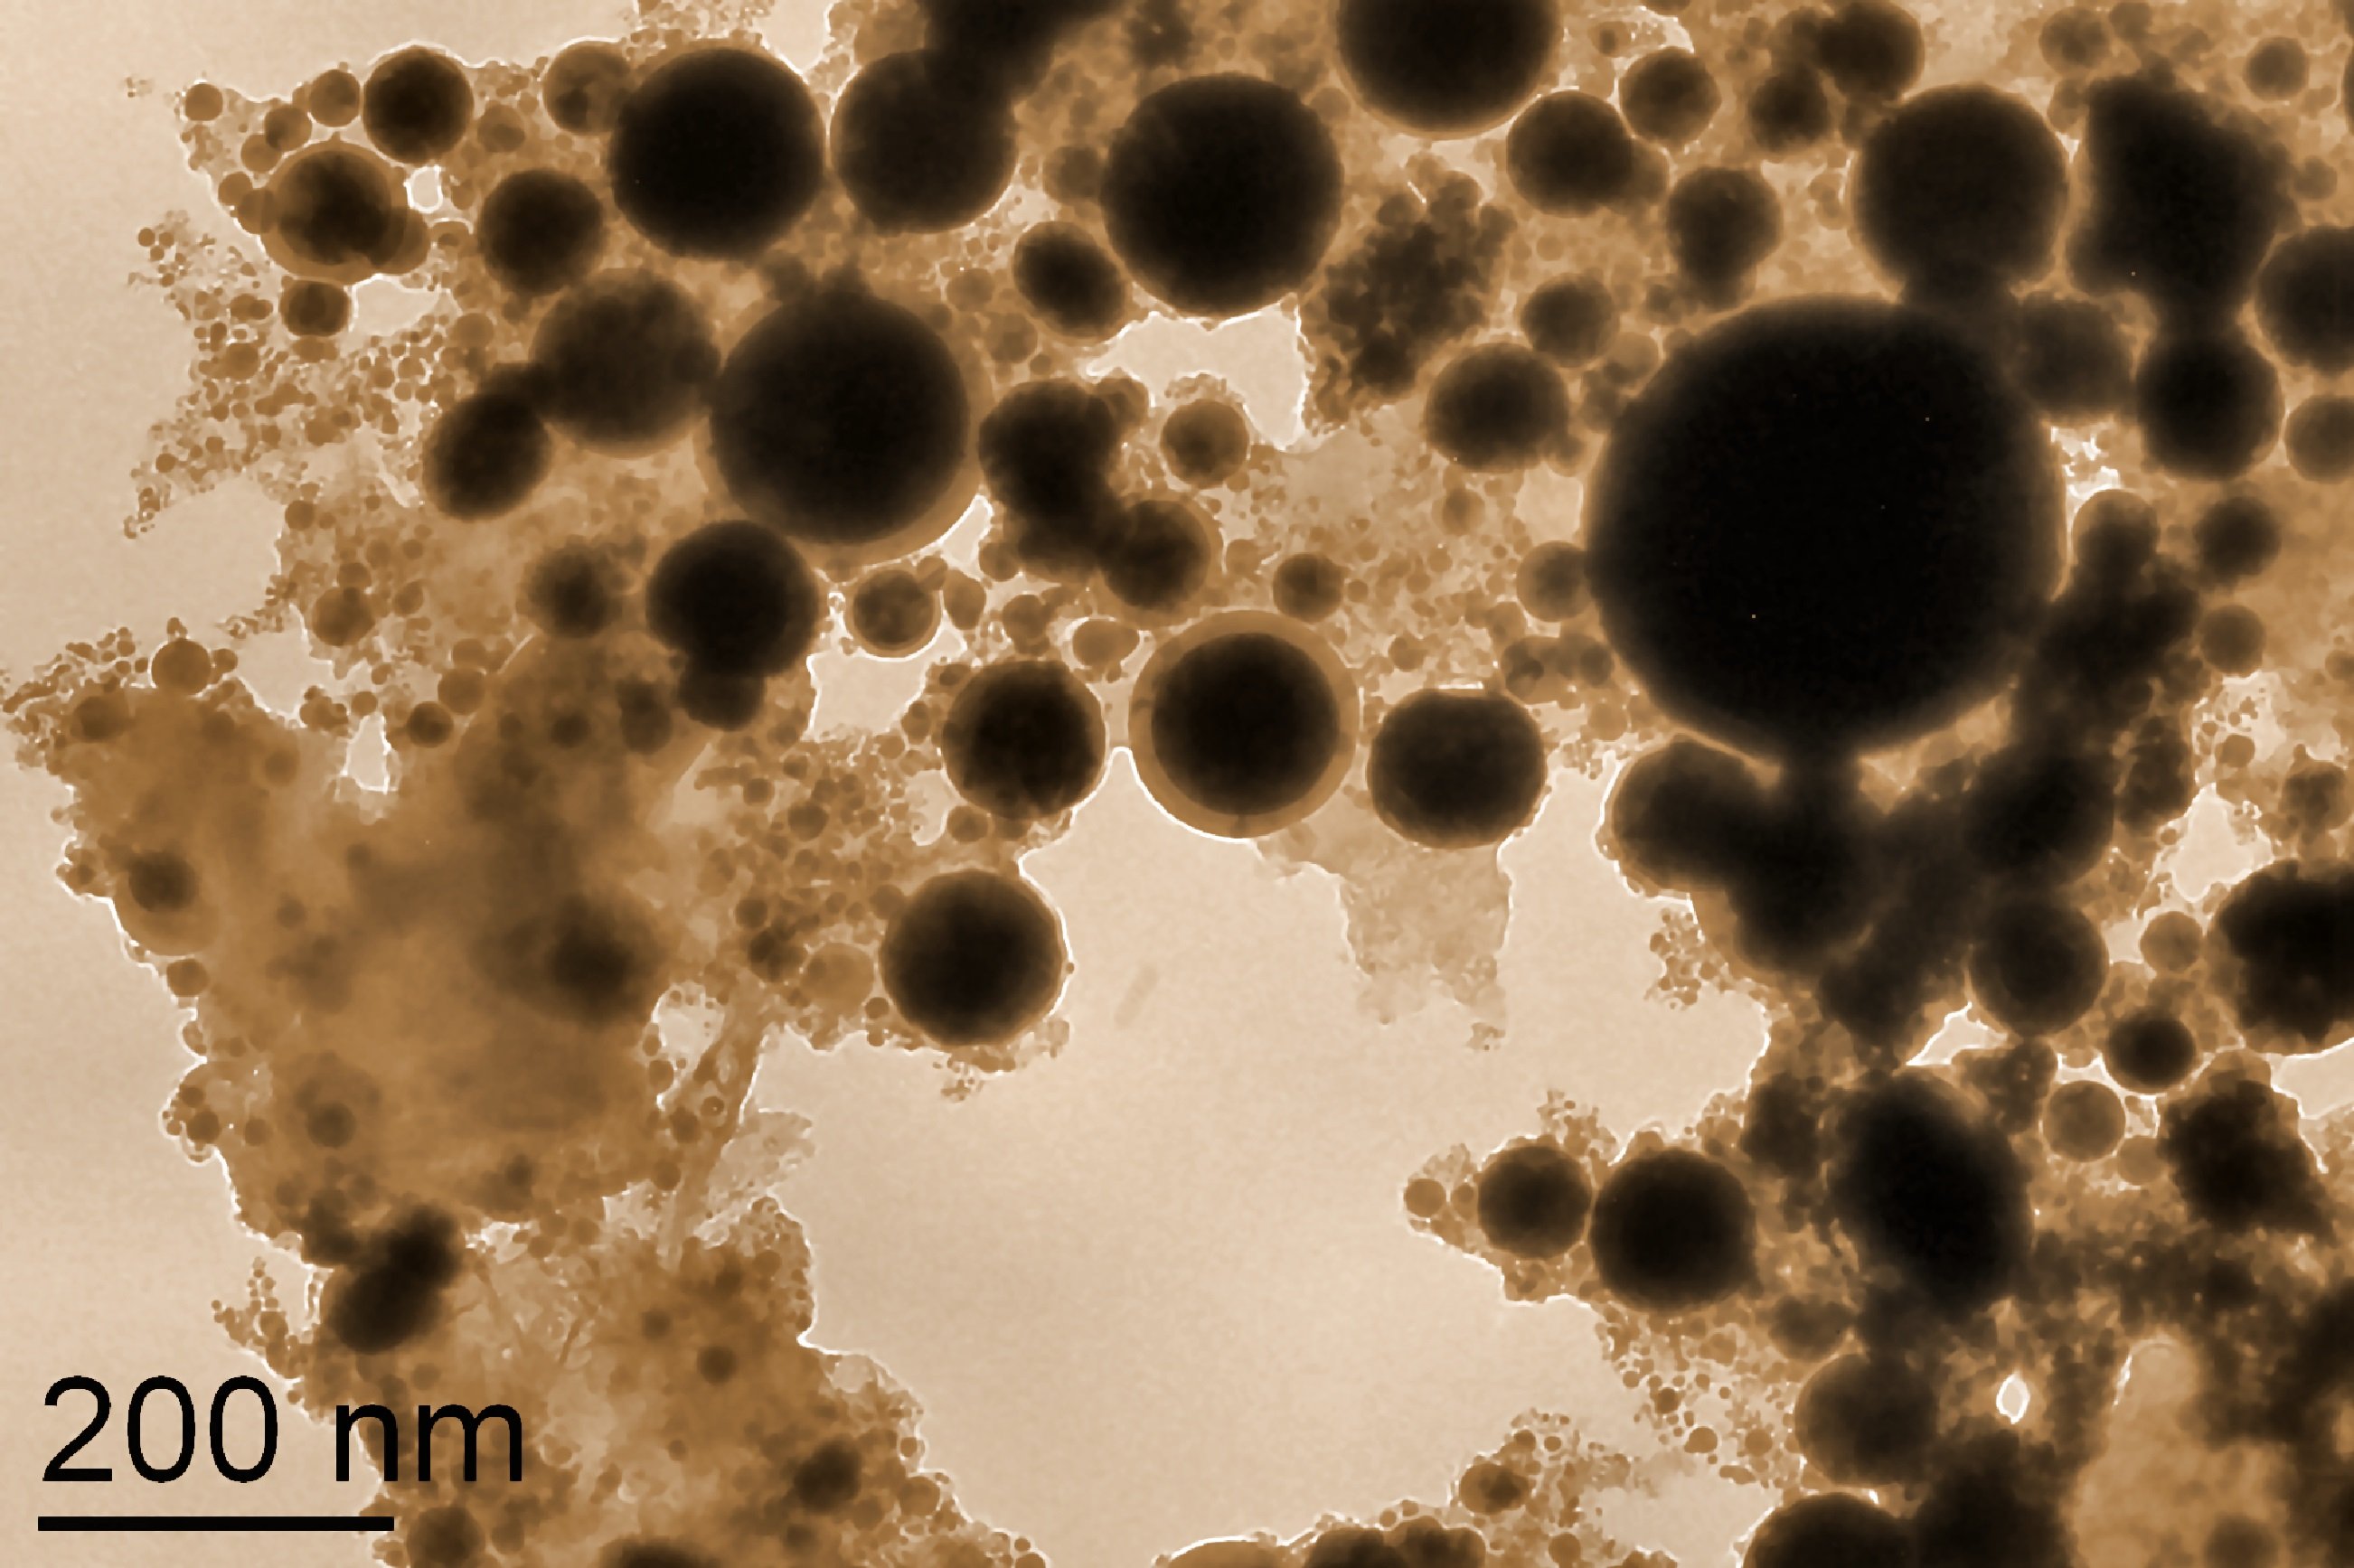 Iron nanoparticles suspended in water.